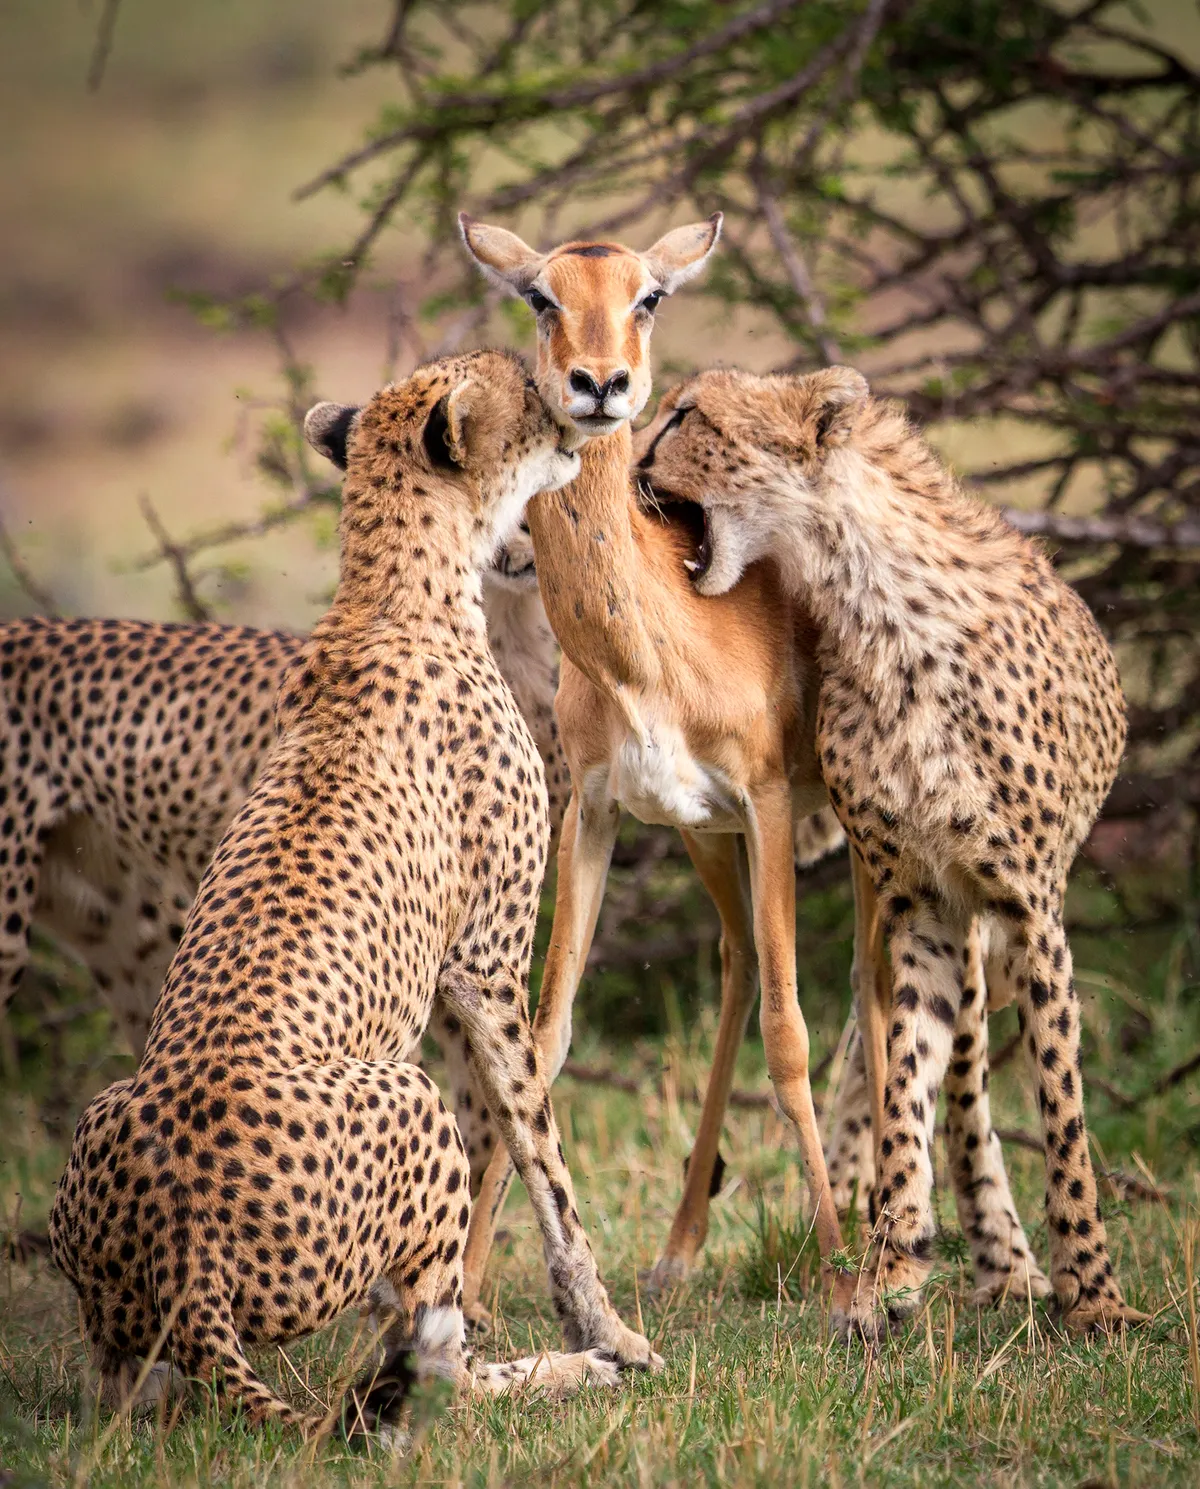 Narasha (mother cheetah) holds an impala by its throat, so that her youngsters could practice their killing skills, in the Masai Mara, Kenya. © Alison Buttigeig/Remembering Cheetahs